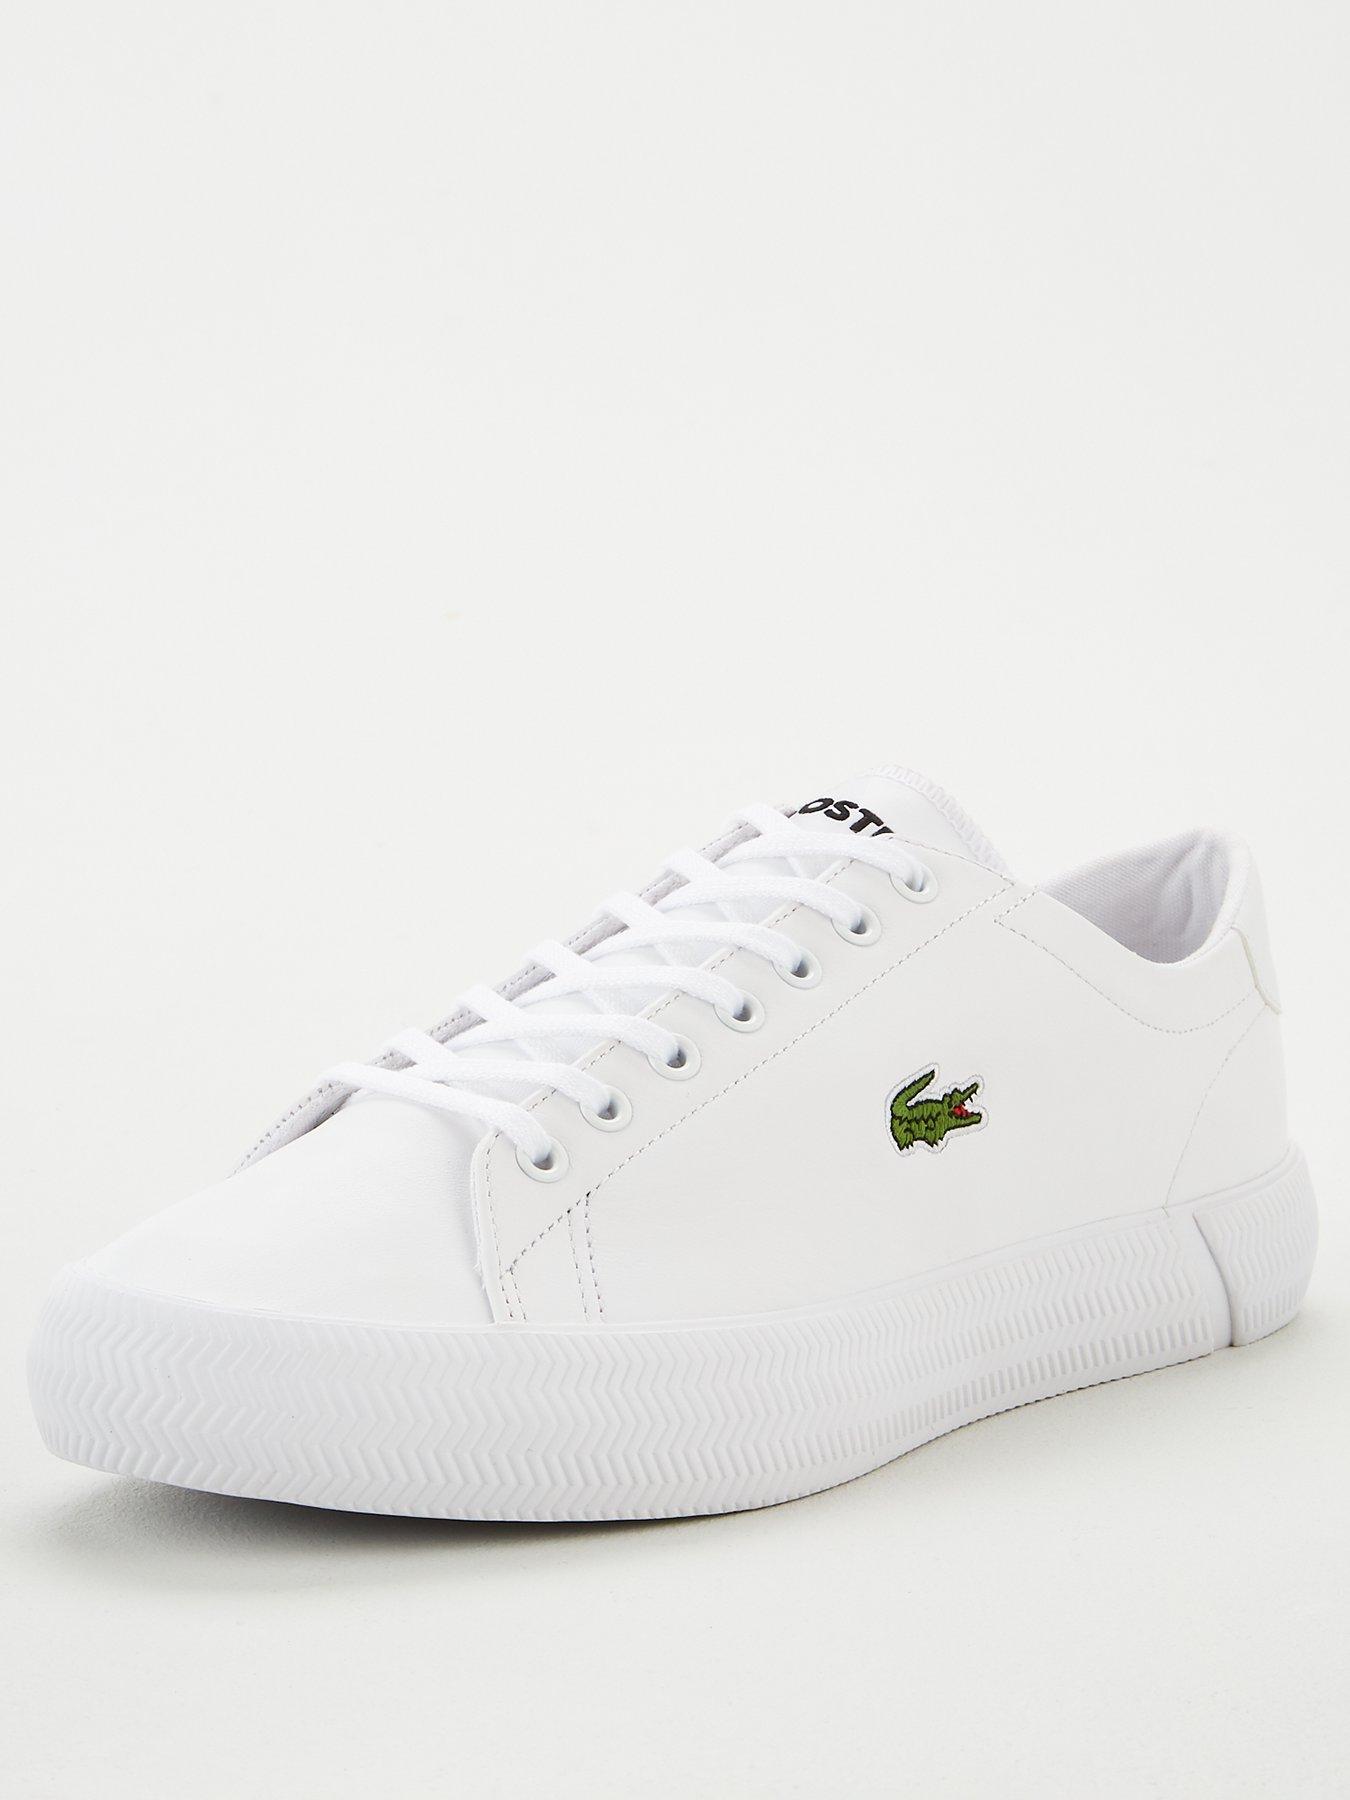 mens white trainers lacoste